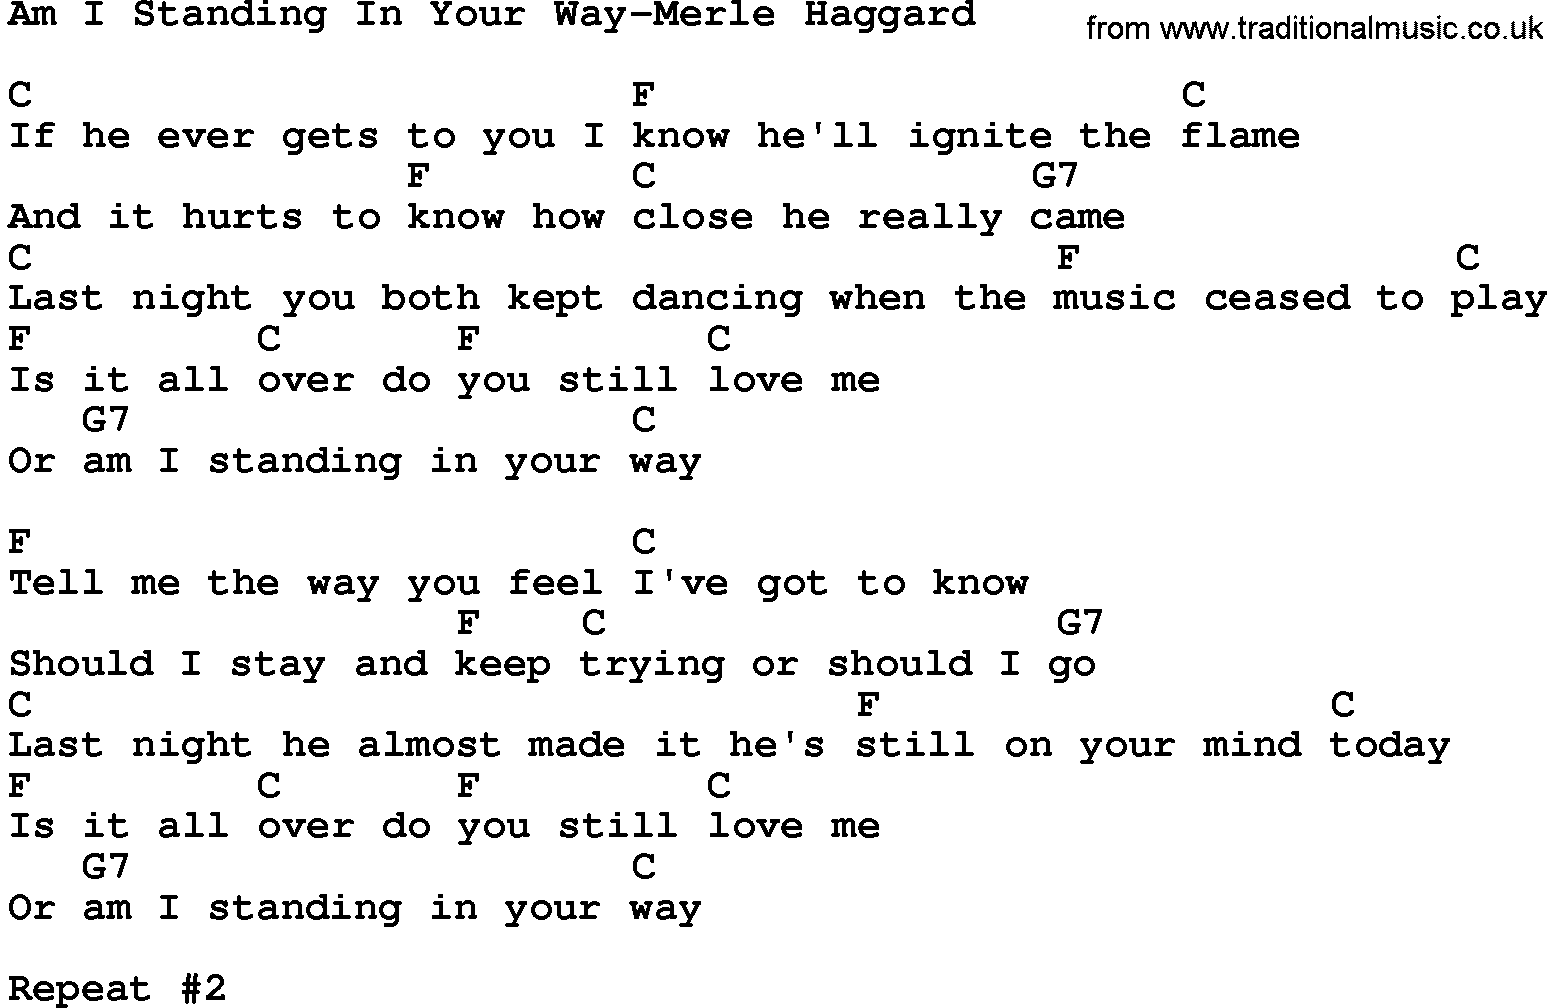 Country music song: Am I Standing In Your Way-Merle Haggard lyrics and chords